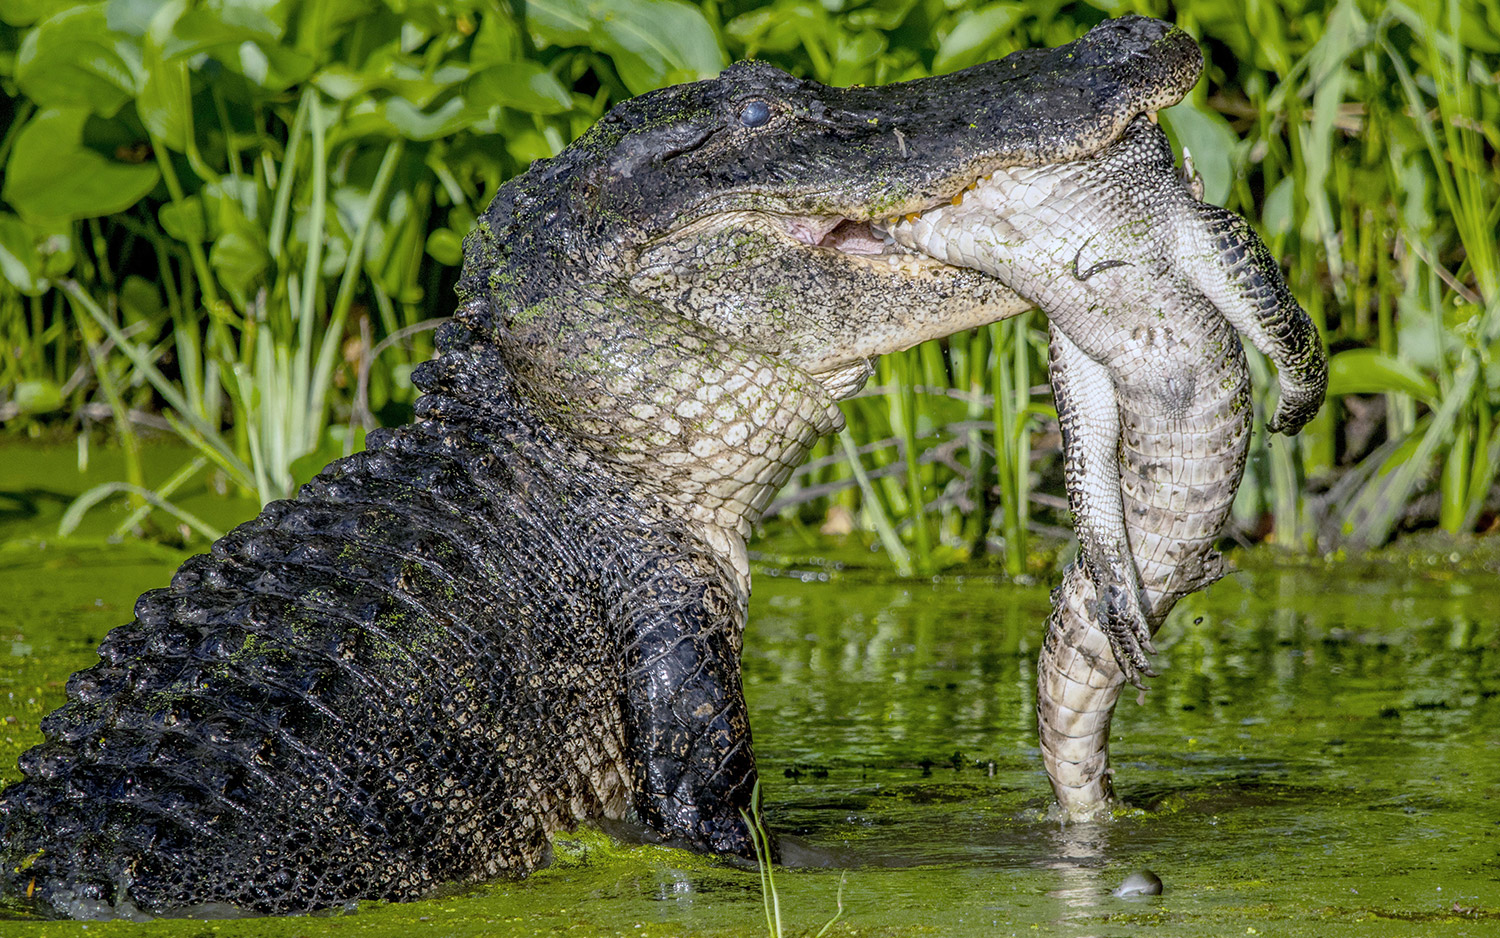 See an Alligator Devour Another Alligator in These Gruesome Photos | Live Science